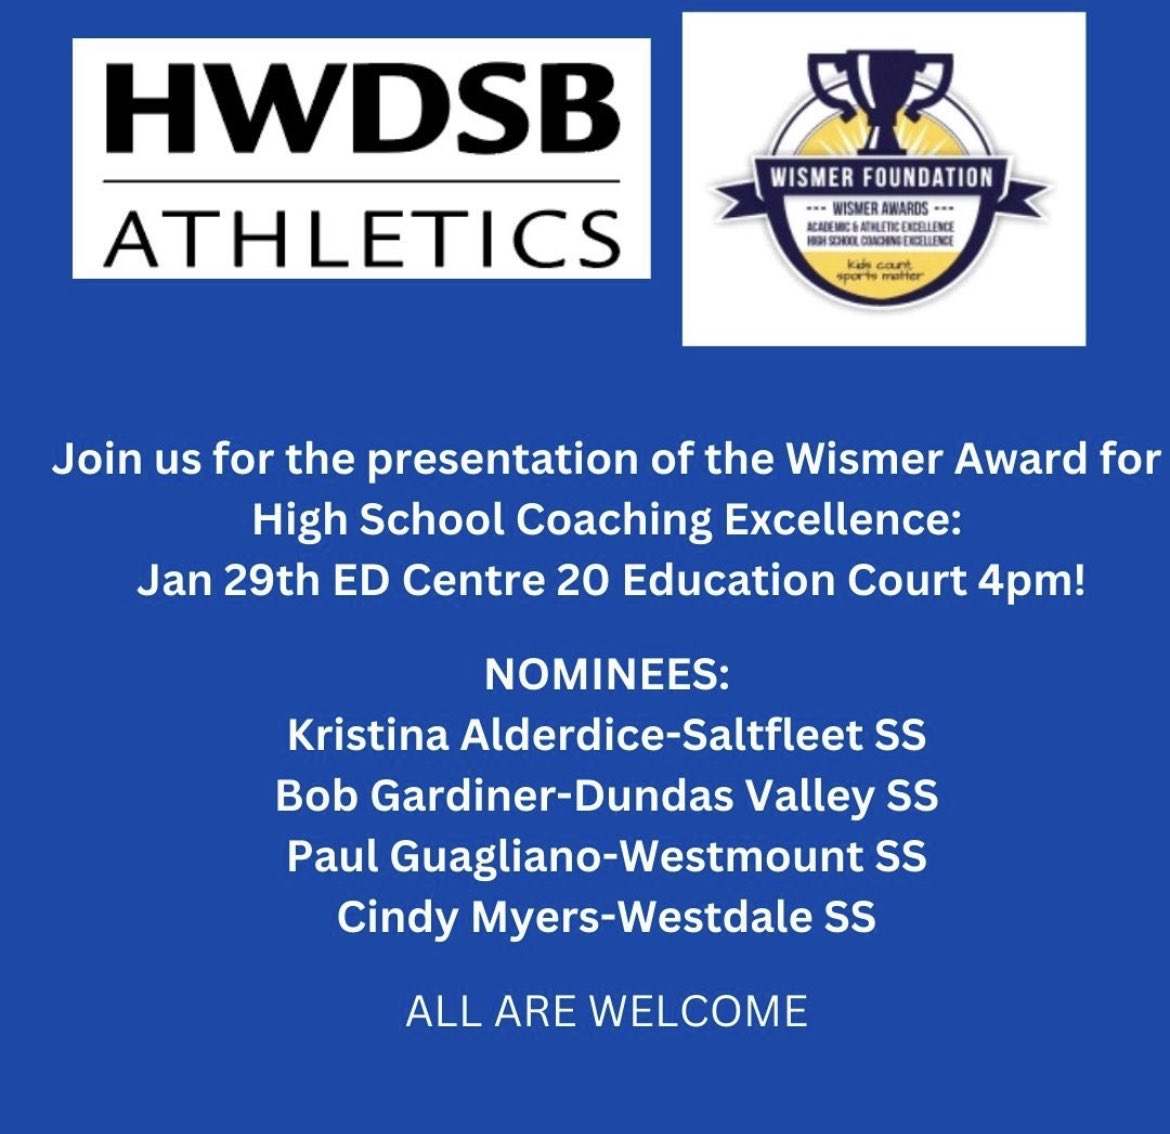 Join us on January 29th to present the Wismer award for coaching excellence to an amazing volunteer coach! Education Centre 4 pm! @hwdsb @Westmount_HWDSB @DVSS_HWDSB @WestdaleSS @SaltfleetHWDSB